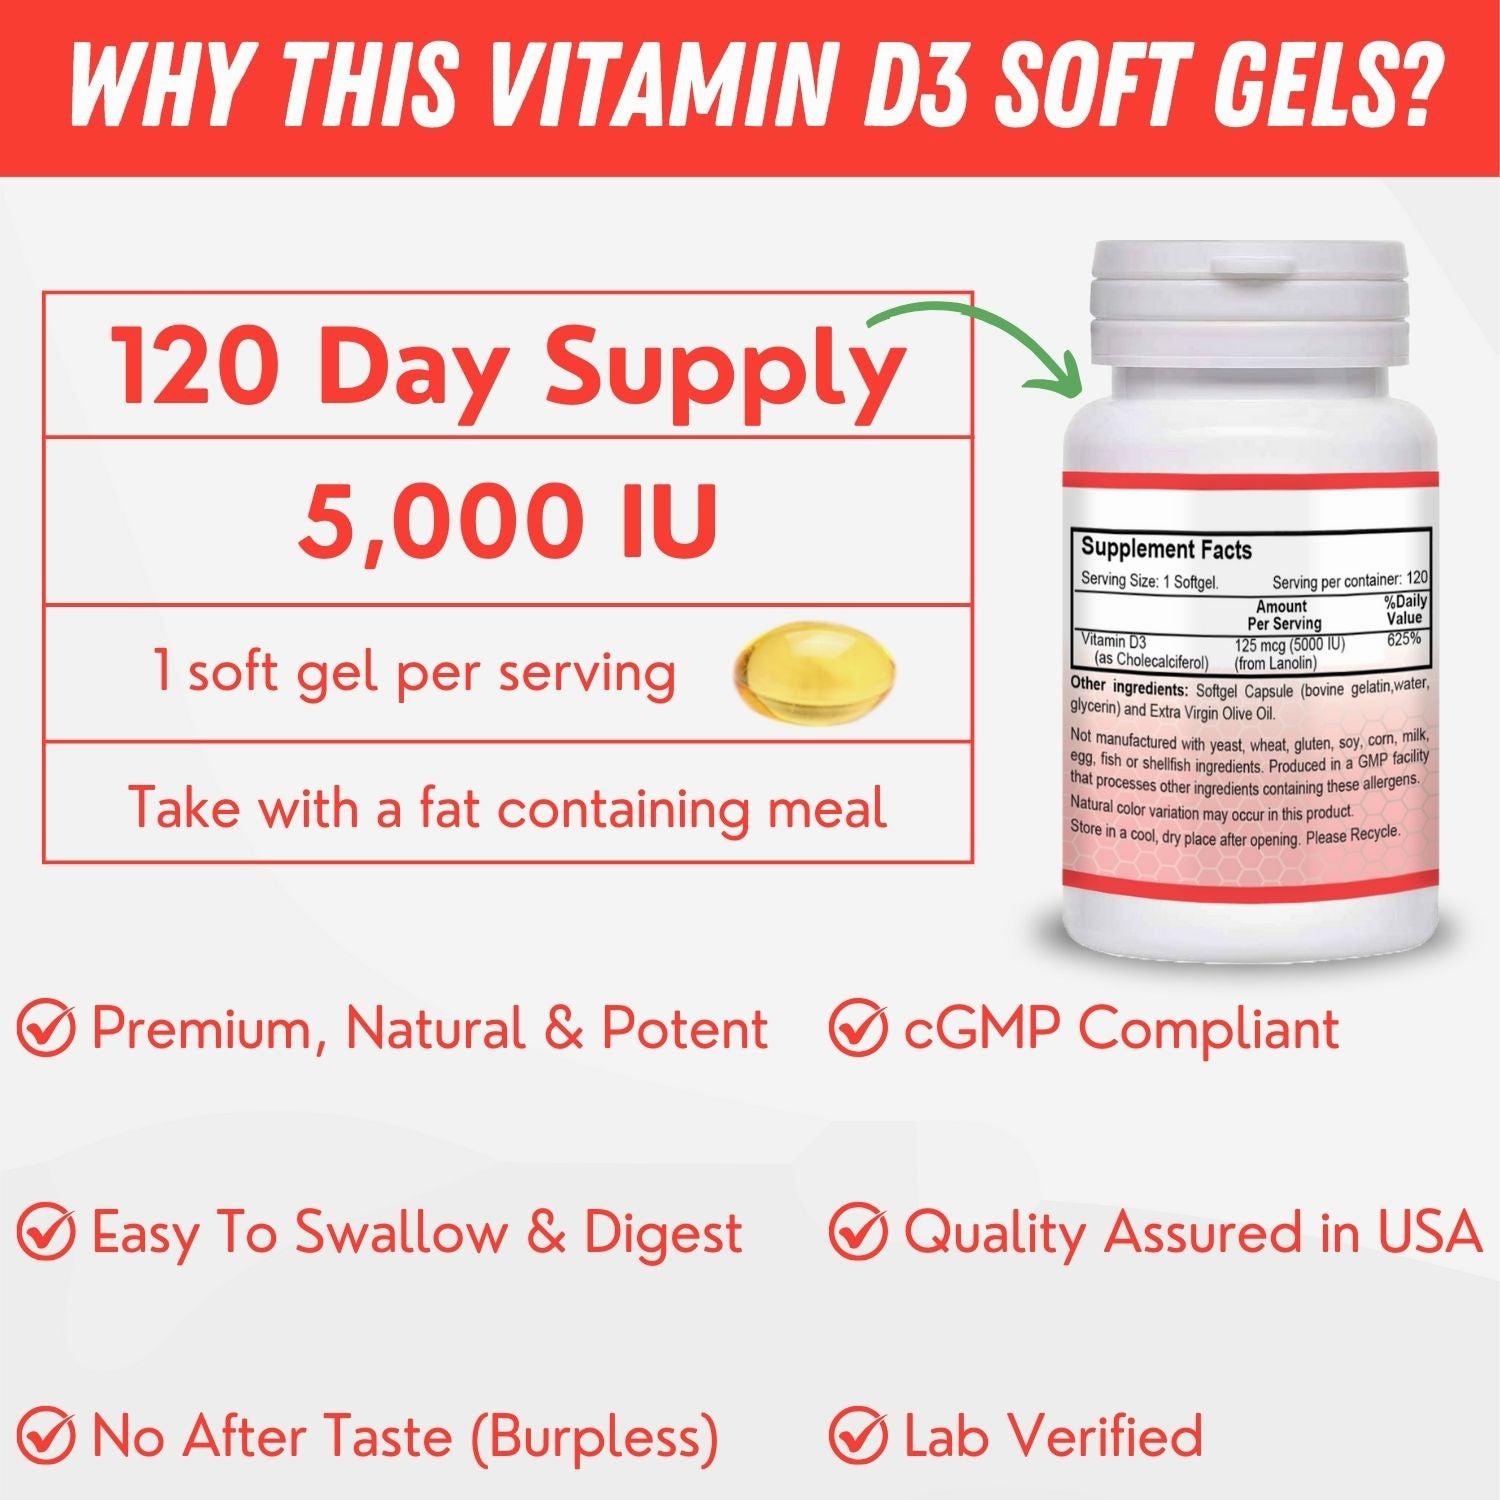 A bottle of Vitamin D3 softgels with 5000IU per serving and a 120-day supply.